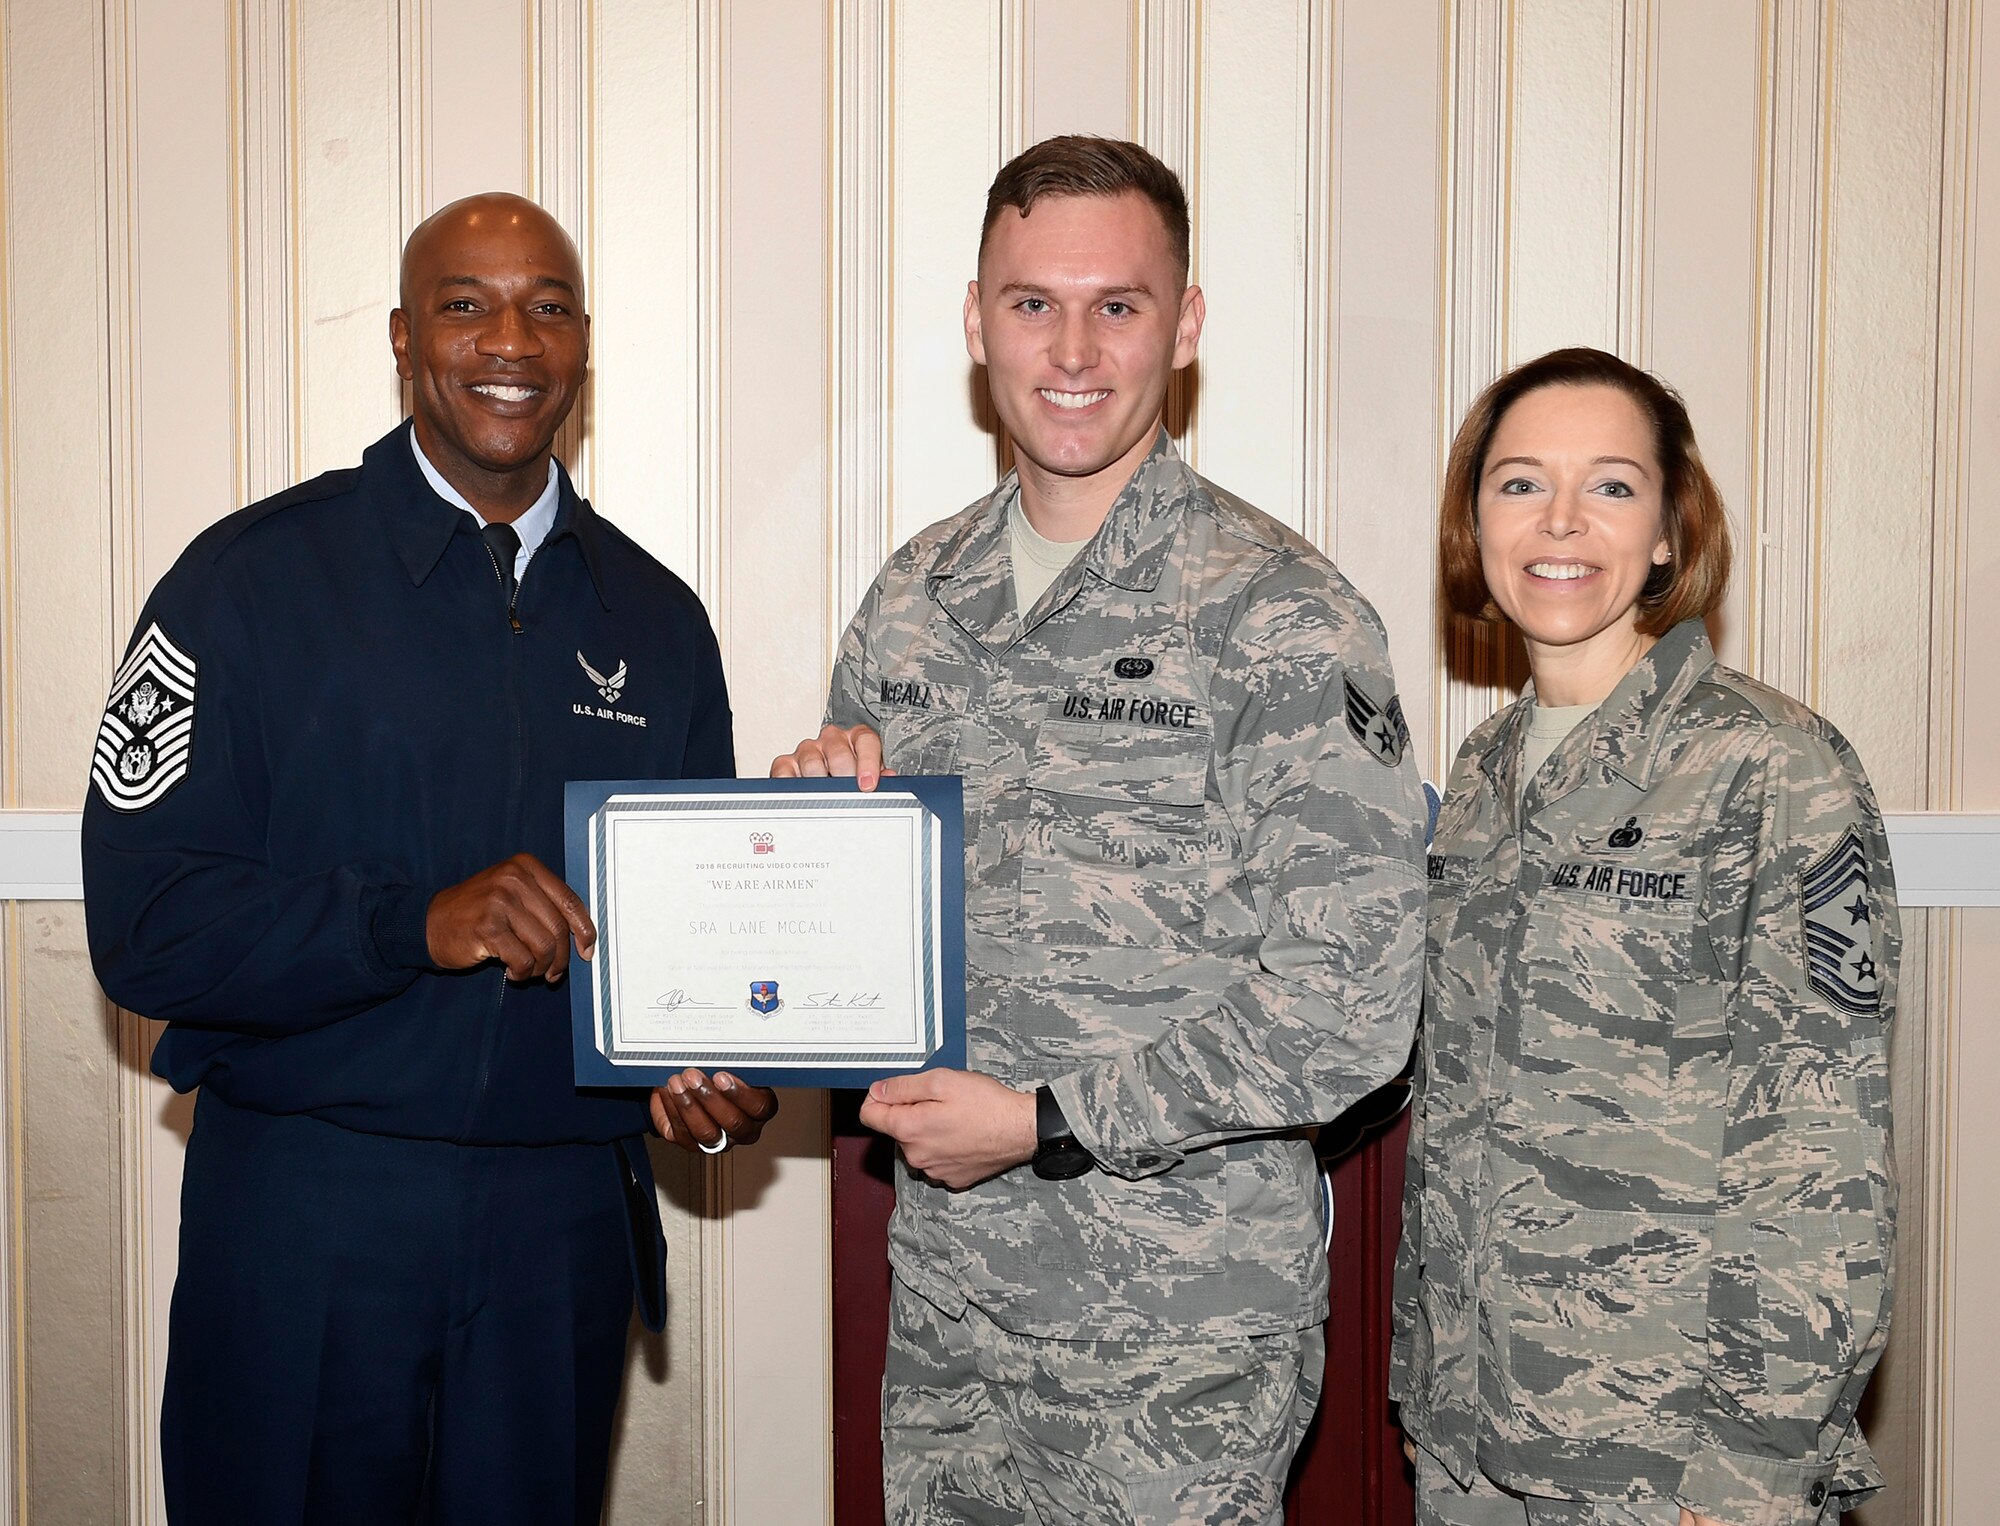 U.S. Air Force Senior Airman Lane McCall, 86th Communications Squadron client systems technician, receives his award after winning the Air Force’s We Are Airmen: Recruiting Video Contest at Washington, D.C., Sept. 17, 2018. McCall creates multimedia productions as a hobby, and runs a social media page where he publishes his products.